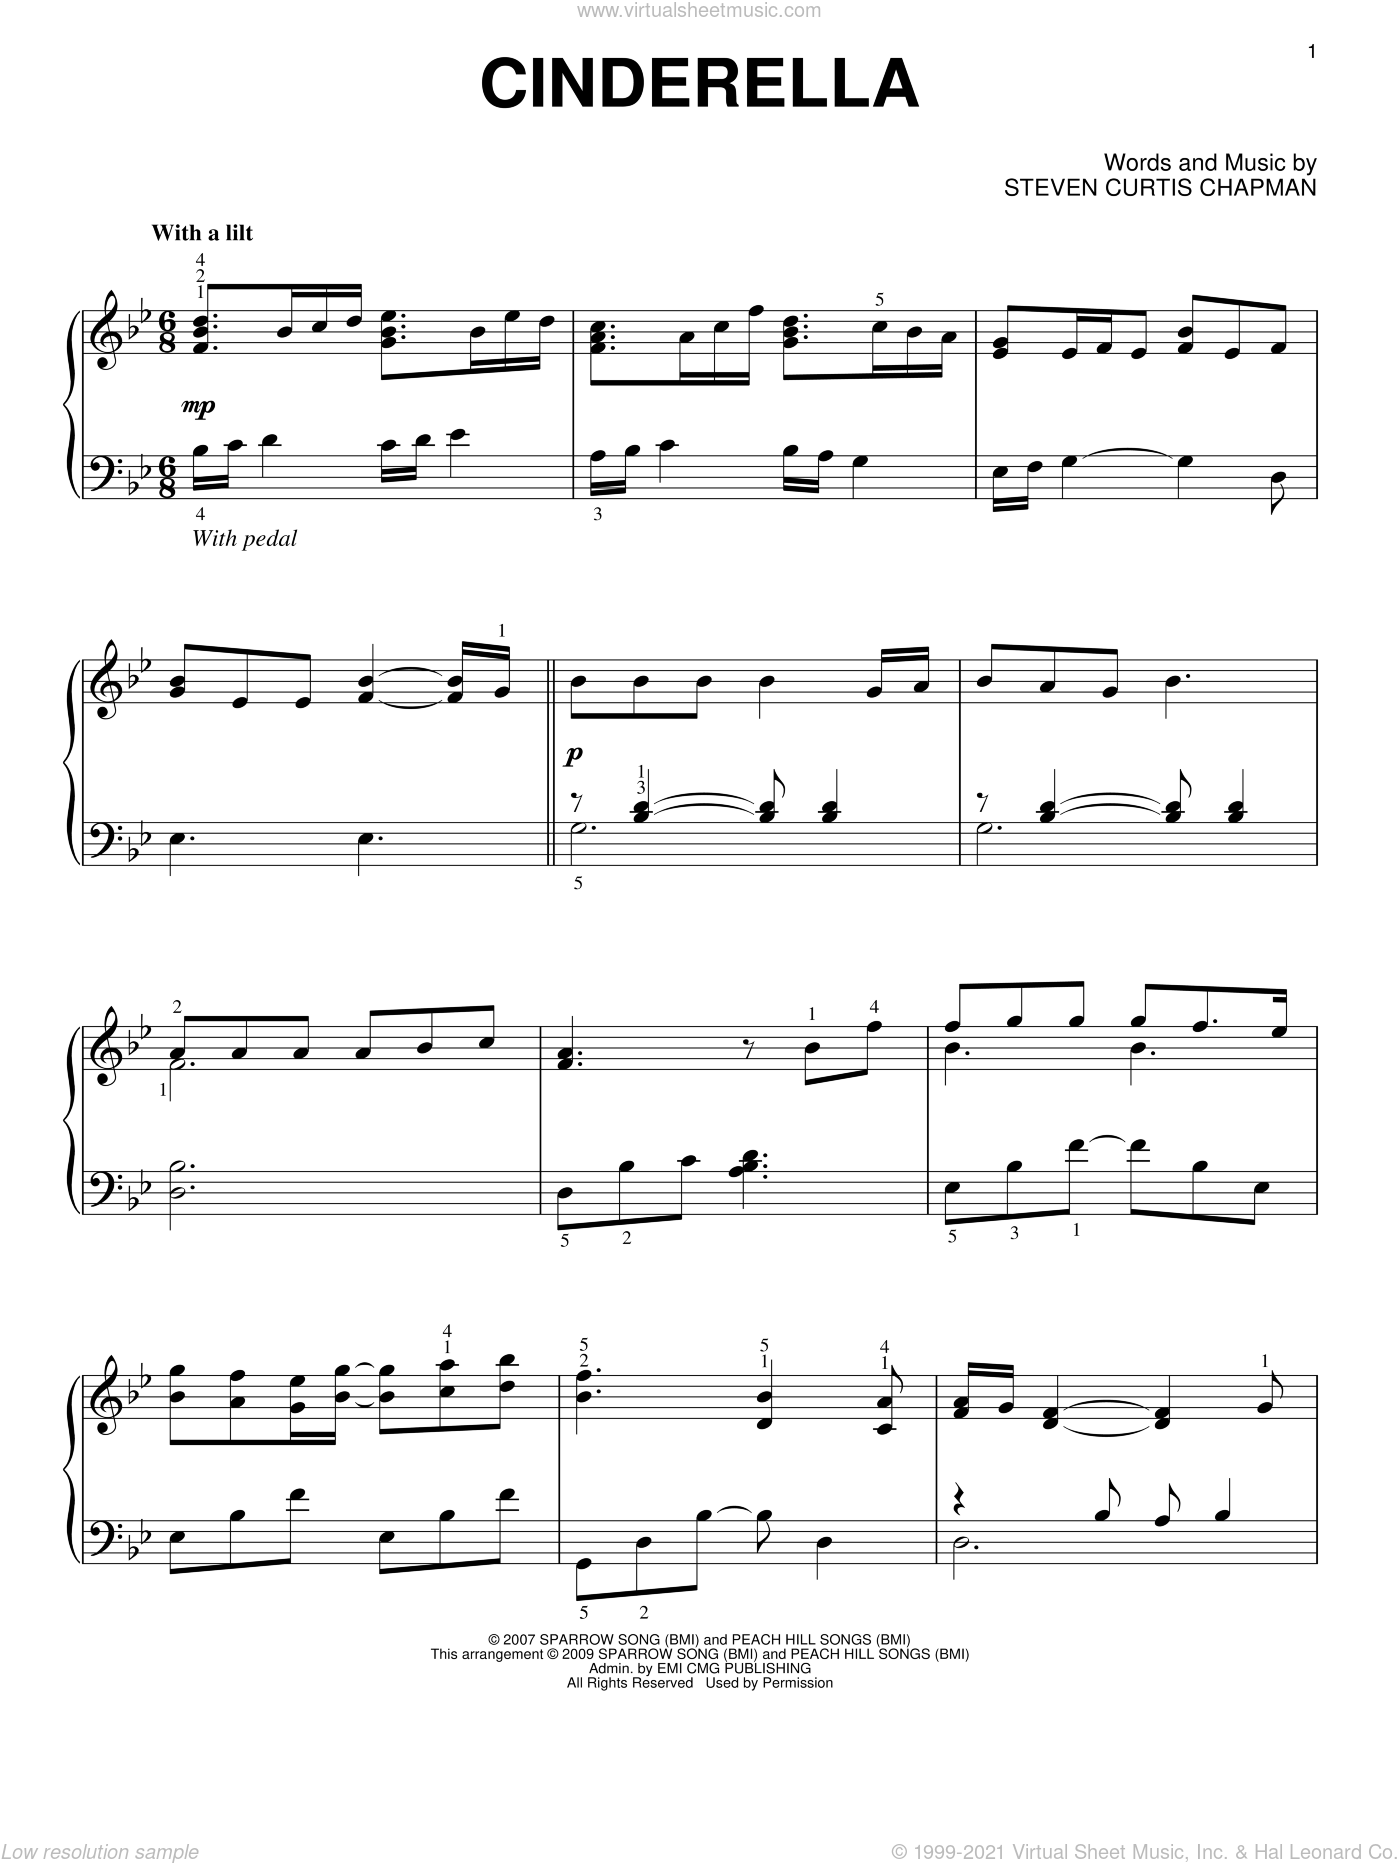 Peaches Sheet Music - 48 Arrangements Available Instantly